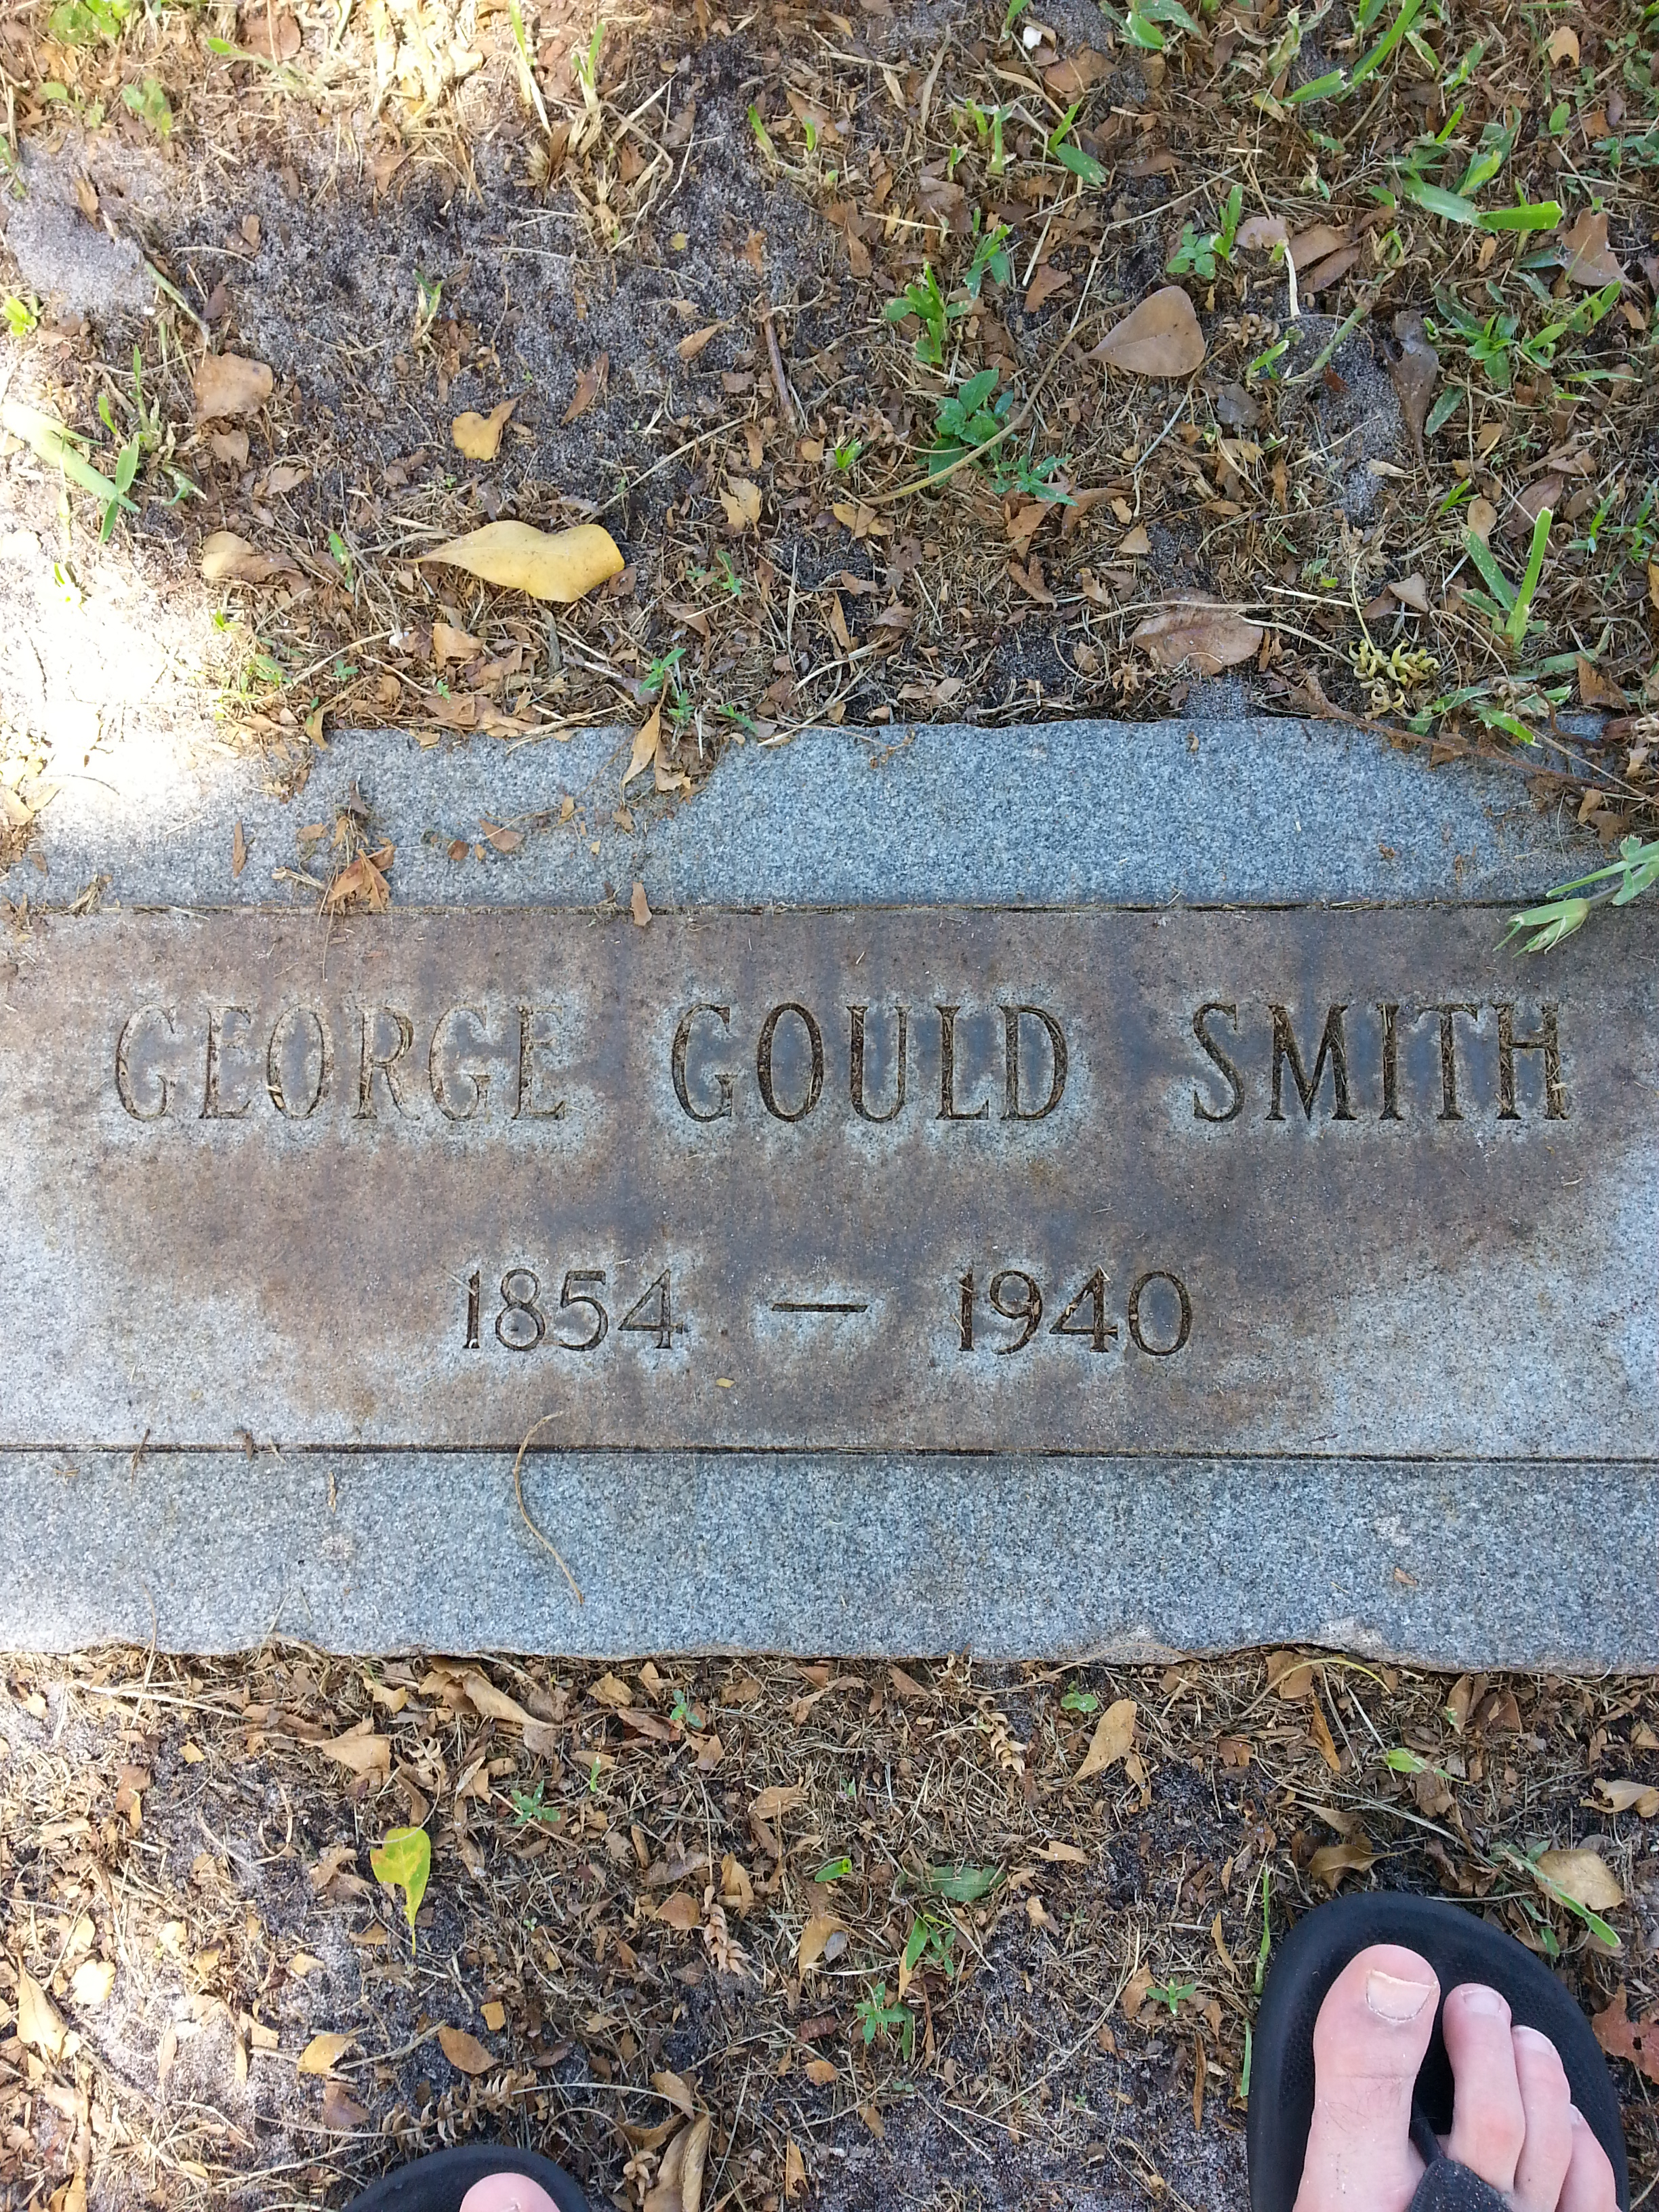 George Gould Smith